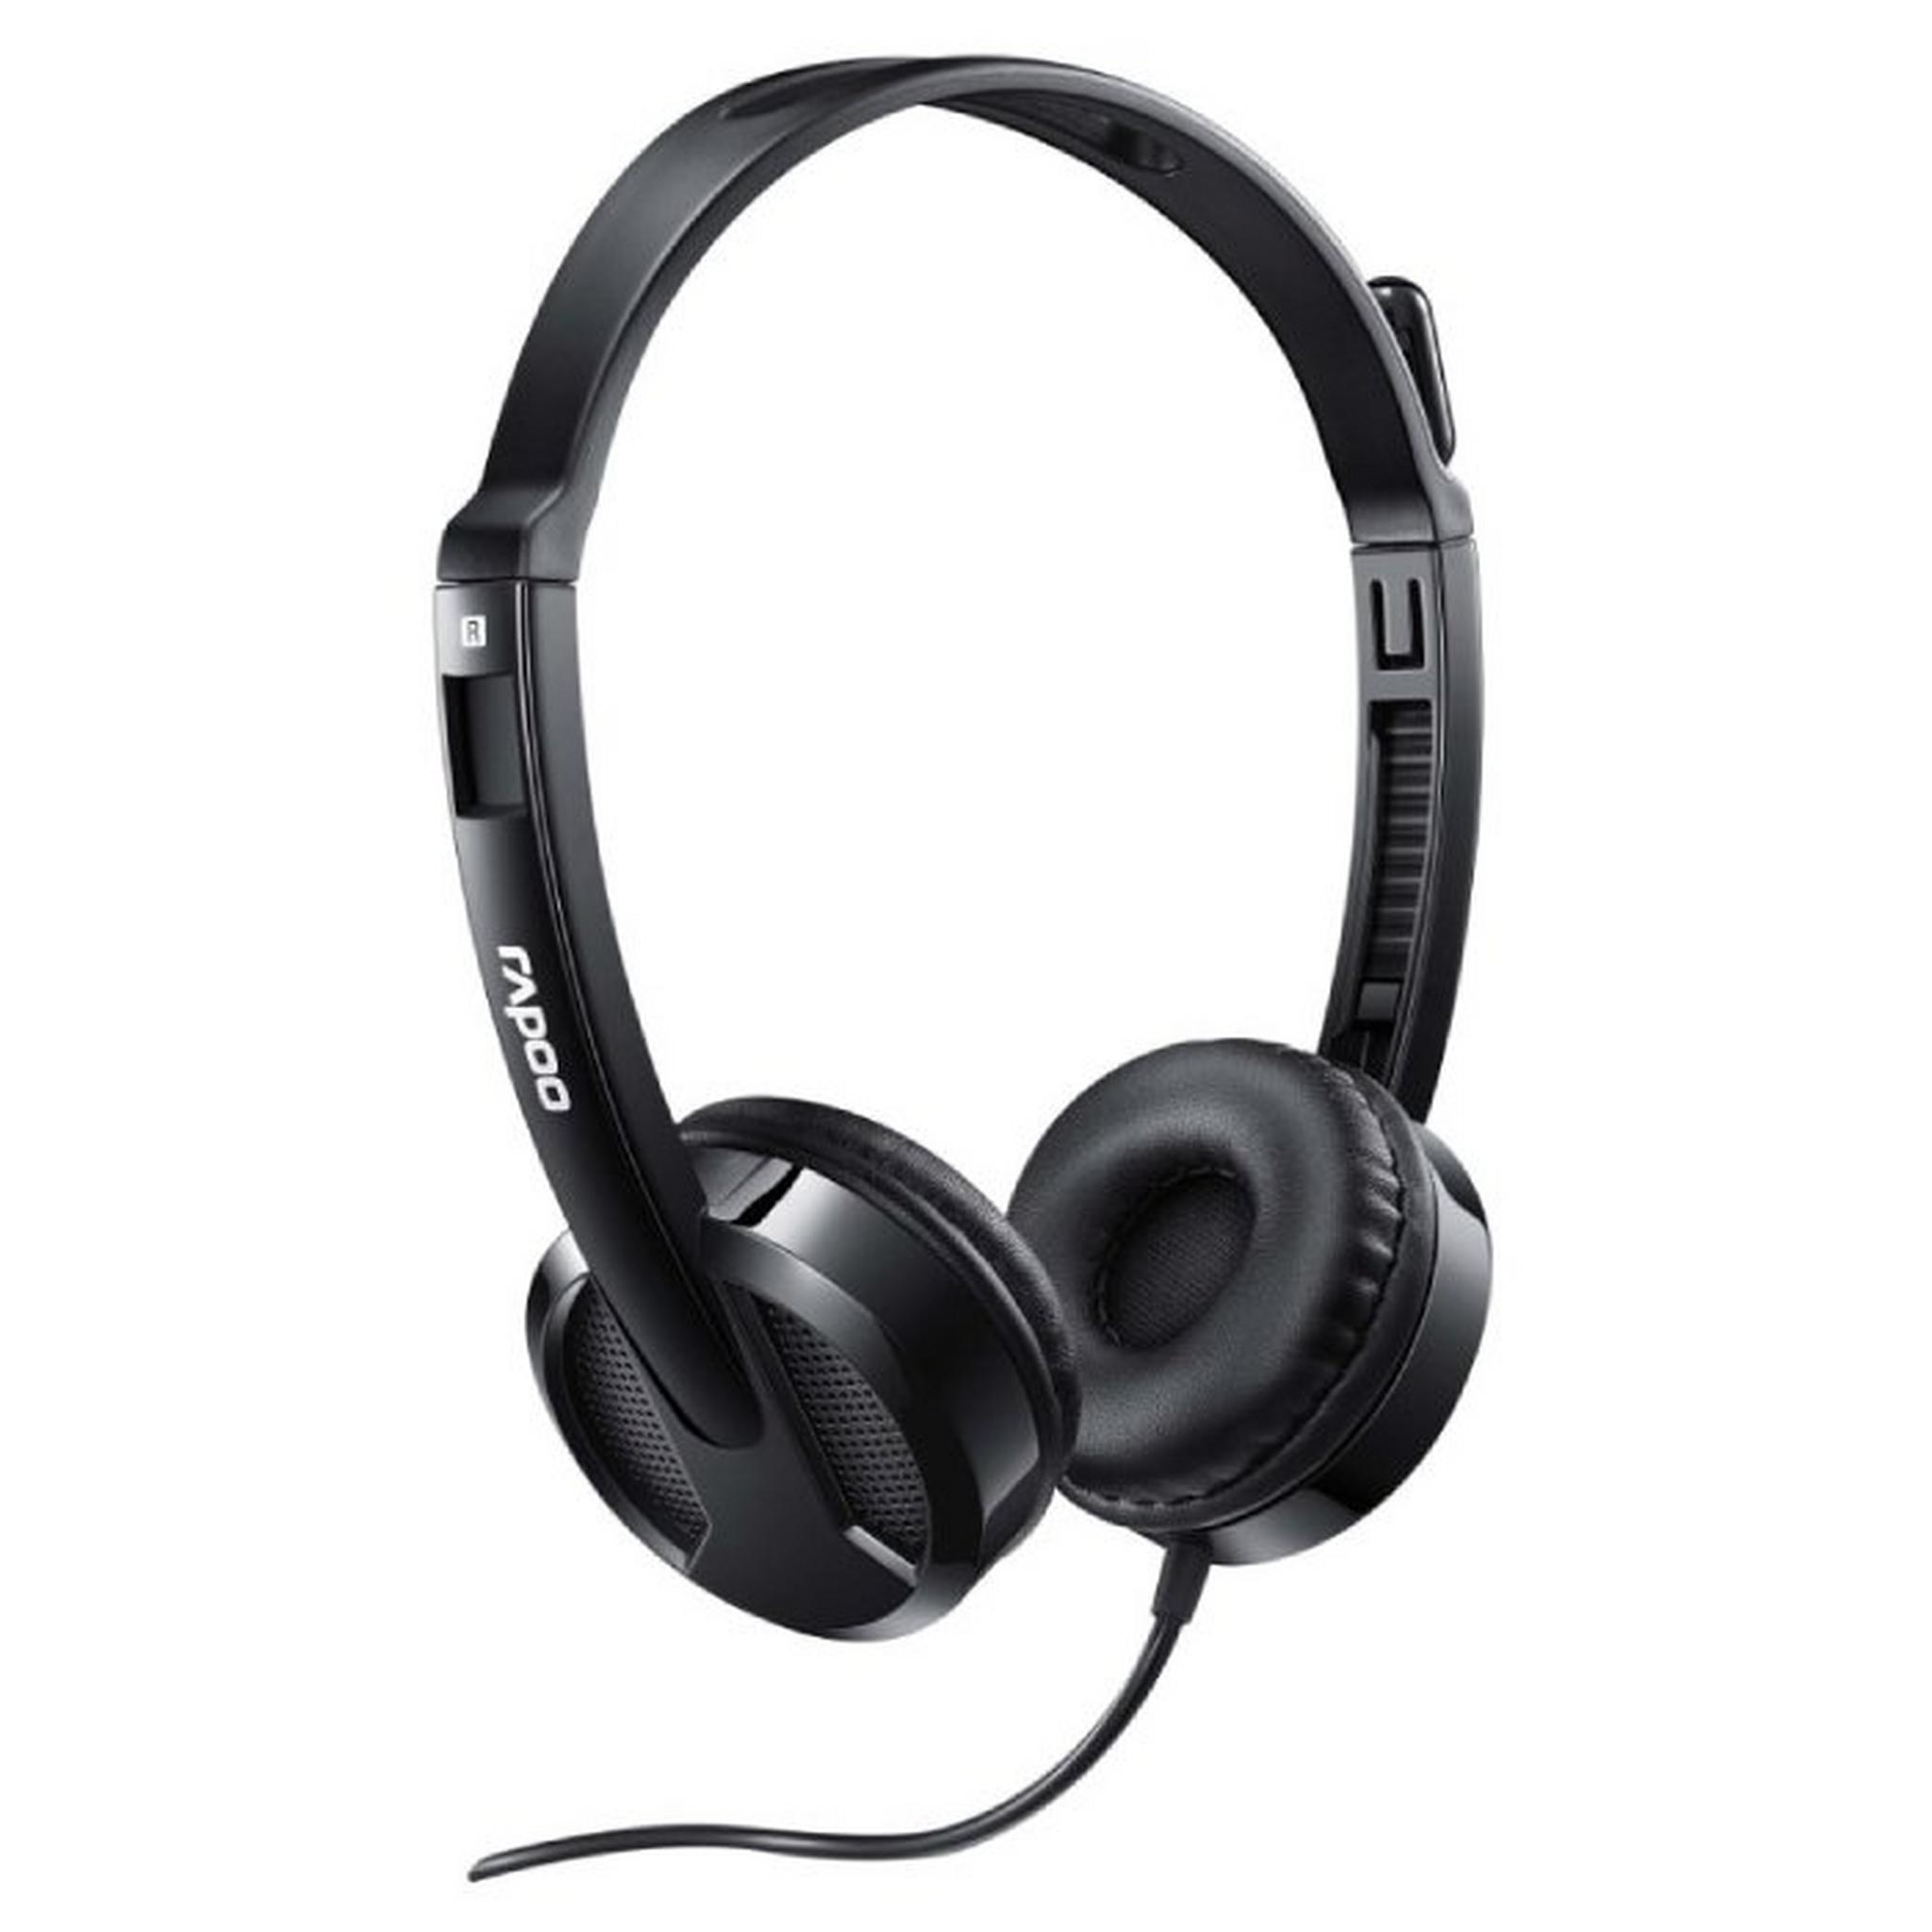 Rapoo H100 Wired Stereo Headset (Black)